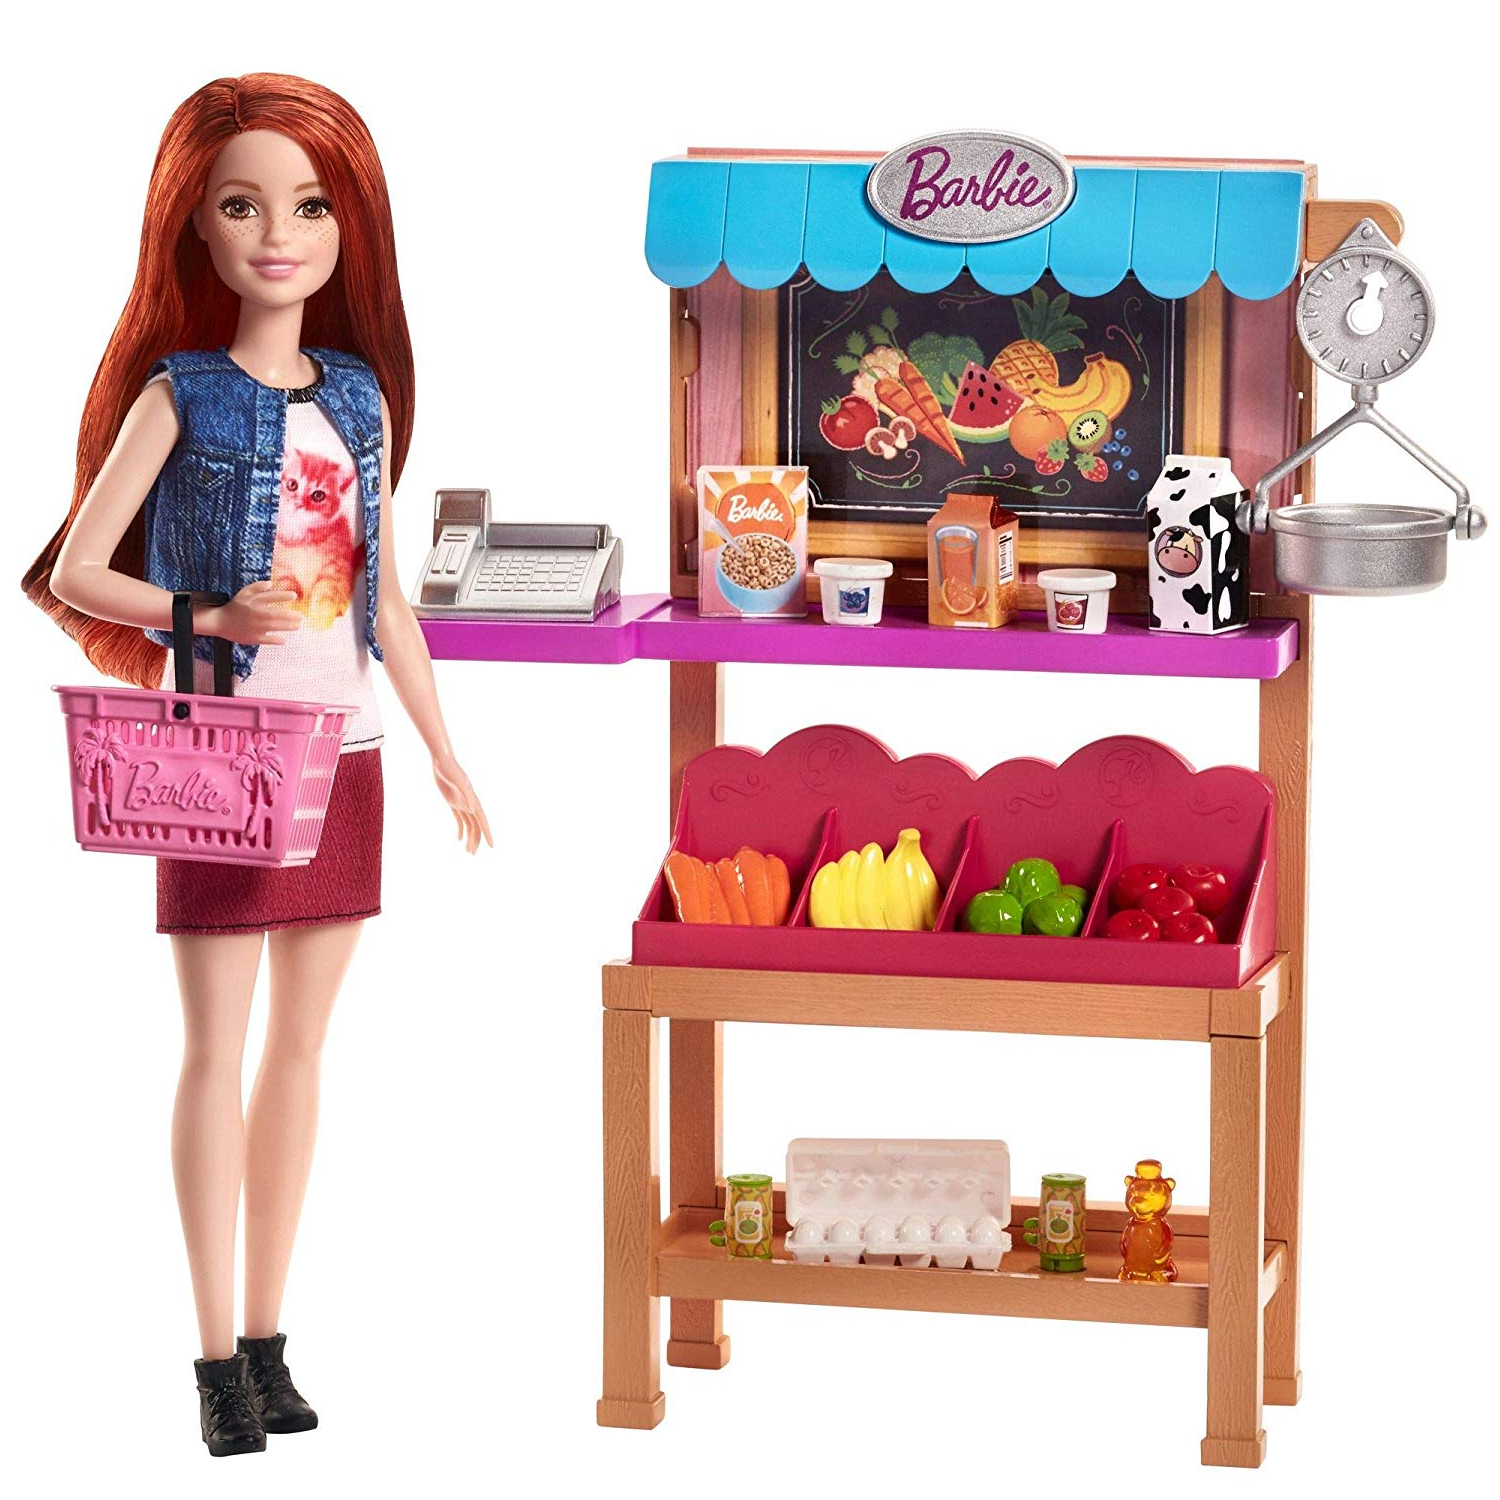 Barbie Grocery Playset for only $9.99! (Reg $16.99)